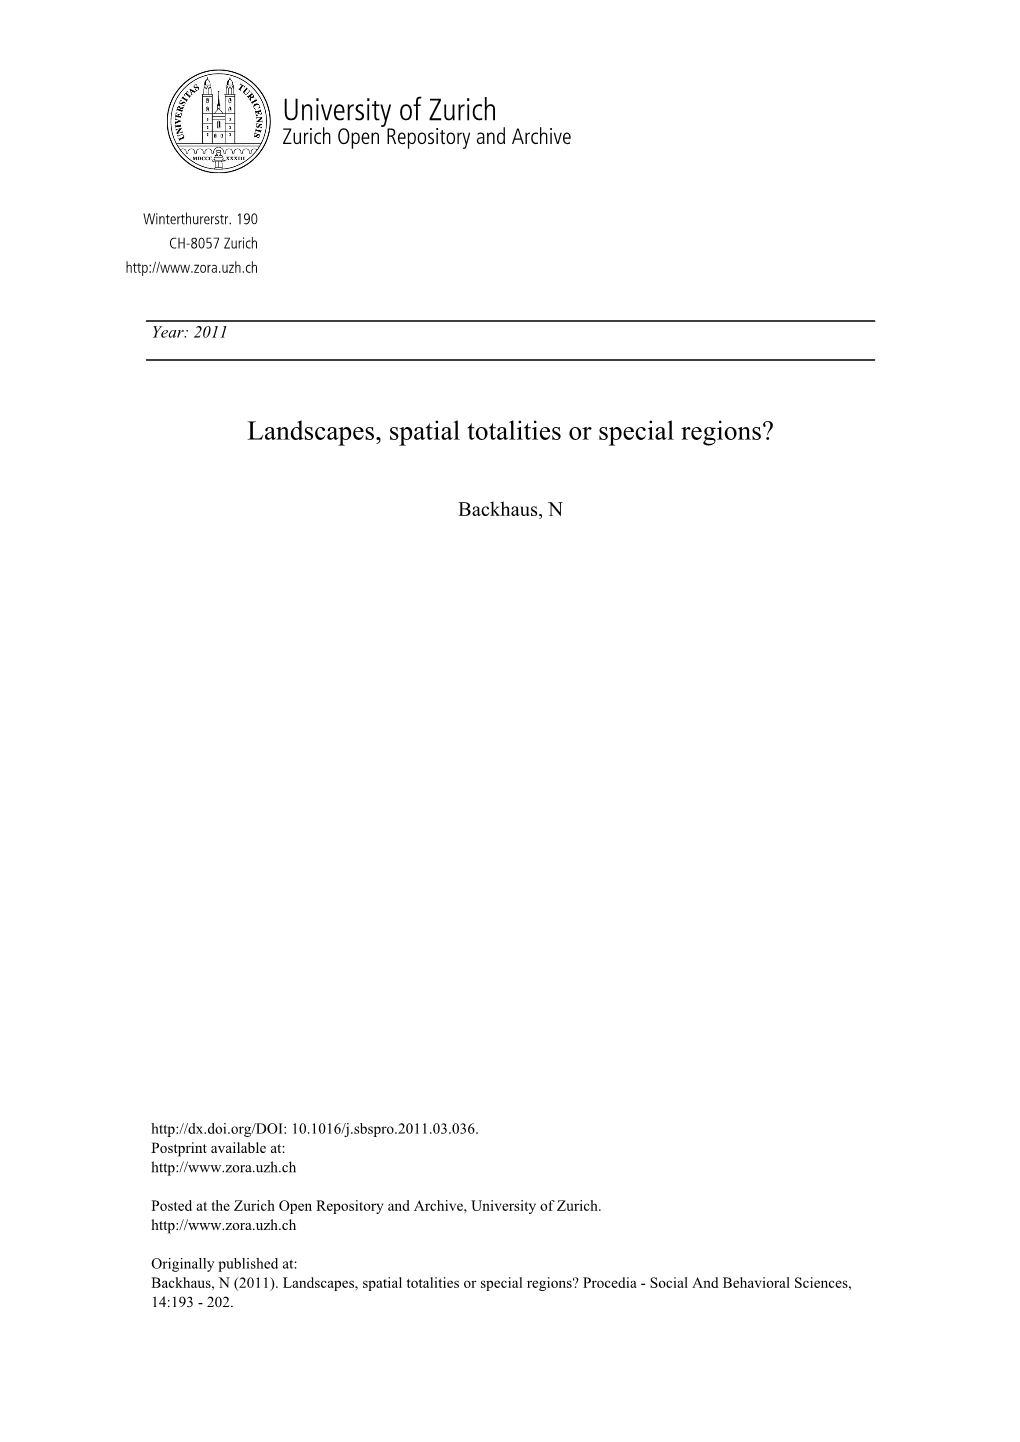 Landscapes, Spatial Totalities Or Special Regions? Procedia - Social and Behavioral Sciences, 14:193 - 202